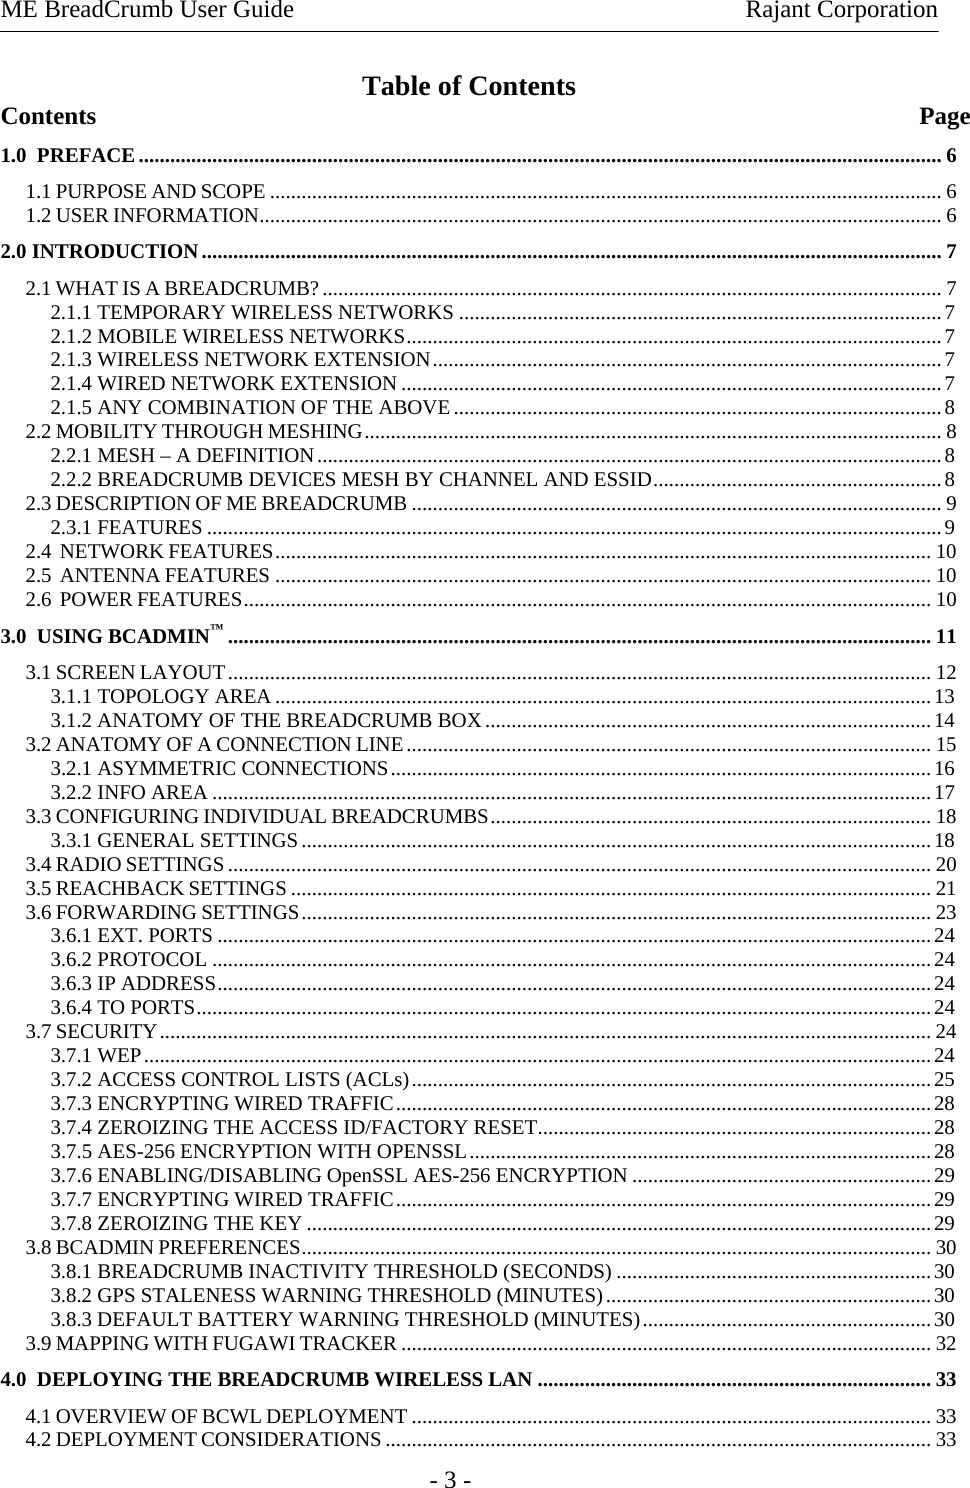 ME BreadCrumb User Guide    Rajant Corporation   - 3 - Table of Contents Contents               Page 1.0  PREFACE......................................................................................................................................................... 6 1.1 PURPOSE AND SCOPE ................................................................................................................................6 1.2 USER INFORMATION.................................................................................................................................. 6 2.0 INTRODUCTION............................................................................................................................................. 7 2.1 WHAT IS A BREADCRUMB?...................................................................................................................... 7 2.1.1 TEMPORARY WIRELESS NETWORKS ............................................................................................7 2.1.2 MOBILE WIRELESS NETWORKS......................................................................................................7 2.1.3 WIRELESS NETWORK EXTENSION.................................................................................................7 2.1.4 WIRED NETWORK EXTENSION .......................................................................................................7 2.1.5 ANY COMBINATION OF THE ABOVE.............................................................................................8 2.2 MOBILITY THROUGH MESHING.............................................................................................................. 8 2.2.1 MESH – A DEFINITION.......................................................................................................................8 2.2.2 BREADCRUMB DEVICES MESH BY CHANNEL AND ESSID.......................................................8 2.3 DESCRIPTION OF ME BREADCRUMB ..................................................................................................... 9 2.3.1 FEATURES ............................................................................................................................................9 2.4  NETWORK FEATURES............................................................................................................................. 10 2.5  ANTENNA FEATURES ............................................................................................................................. 10 2.6  POWER FEATURES................................................................................................................................... 10 3.0  USING BCADMIN™...................................................................................................................................... 11 3.1 SCREEN LAYOUT...................................................................................................................................... 12 3.1.1 TOPOLOGY AREA.............................................................................................................................13 3.1.2 ANATOMY OF THE BREADCRUMB BOX.....................................................................................14 3.2 ANATOMY OF A CONNECTION LINE.................................................................................................... 15 3.2.1 ASYMMETRIC CONNECTIONS.......................................................................................................16 3.2.2 INFO AREA .........................................................................................................................................17 3.3 CONFIGURING INDIVIDUAL BREADCRUMBS.................................................................................... 18 3.3.1 GENERAL SETTINGS........................................................................................................................18 3.4 RADIO SETTINGS...................................................................................................................................... 20 3.5 REACHBACK SETTINGS .......................................................................................................................... 21 3.6 FORWARDING SETTINGS........................................................................................................................ 23 3.6.1 EXT. PORTS ........................................................................................................................................24 3.6.2 PROTOCOL .........................................................................................................................................24 3.6.3 IP ADDRESS........................................................................................................................................24 3.6.4 TO PORTS............................................................................................................................................24 3.7 SECURITY................................................................................................................................................... 24 3.7.1 WEP......................................................................................................................................................24 3.7.2 ACCESS CONTROL LISTS (ACLs)...................................................................................................25 3.7.3 ENCRYPTING WIRED TRAFFIC......................................................................................................28 3.7.4 ZEROIZING THE ACCESS ID/FACTORY RESET...........................................................................28 3.7.5 AES-256 ENCRYPTION WITH OPENSSL........................................................................................28 3.7.6 ENABLING/DISABLING OpenSSL AES-256 ENCRYPTION .........................................................29 3.7.7 ENCRYPTING WIRED TRAFFIC......................................................................................................29 3.7.8 ZEROIZING THE KEY .......................................................................................................................29 3.8 BCADMIN PREFERENCES........................................................................................................................ 30 3.8.1 BREADCRUMB INACTIVITY THRESHOLD (SECONDS) ............................................................30 3.8.2 GPS STALENESS WARNING THRESHOLD (MINUTES)..............................................................30 3.8.3 DEFAULT BATTERY WARNING THRESHOLD (MINUTES).......................................................30 3.9 MAPPING WITH FUGAWI TRACKER ..................................................................................................... 32 4.0  DEPLOYING THE BREADCRUMB WIRELESS LAN ........................................................................... 33 4.1 OVERVIEW OF BCWL DEPLOYMENT ................................................................................................... 33 4.2 DEPLOYMENT CONSIDERATIONS ........................................................................................................ 33 